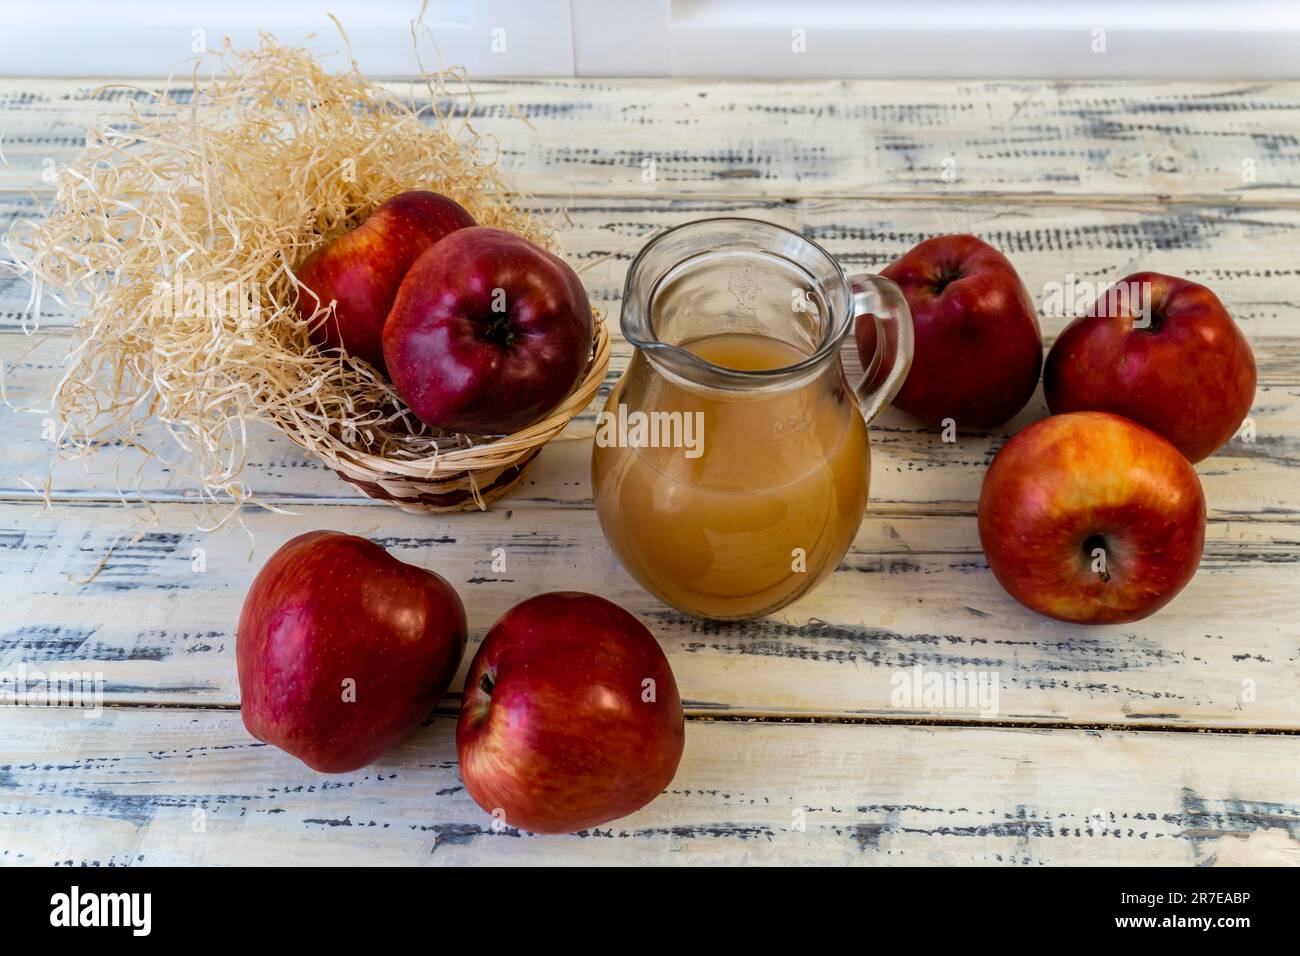 Red apples in a basket and apple juice in a jug on a wooden table Stock Photo